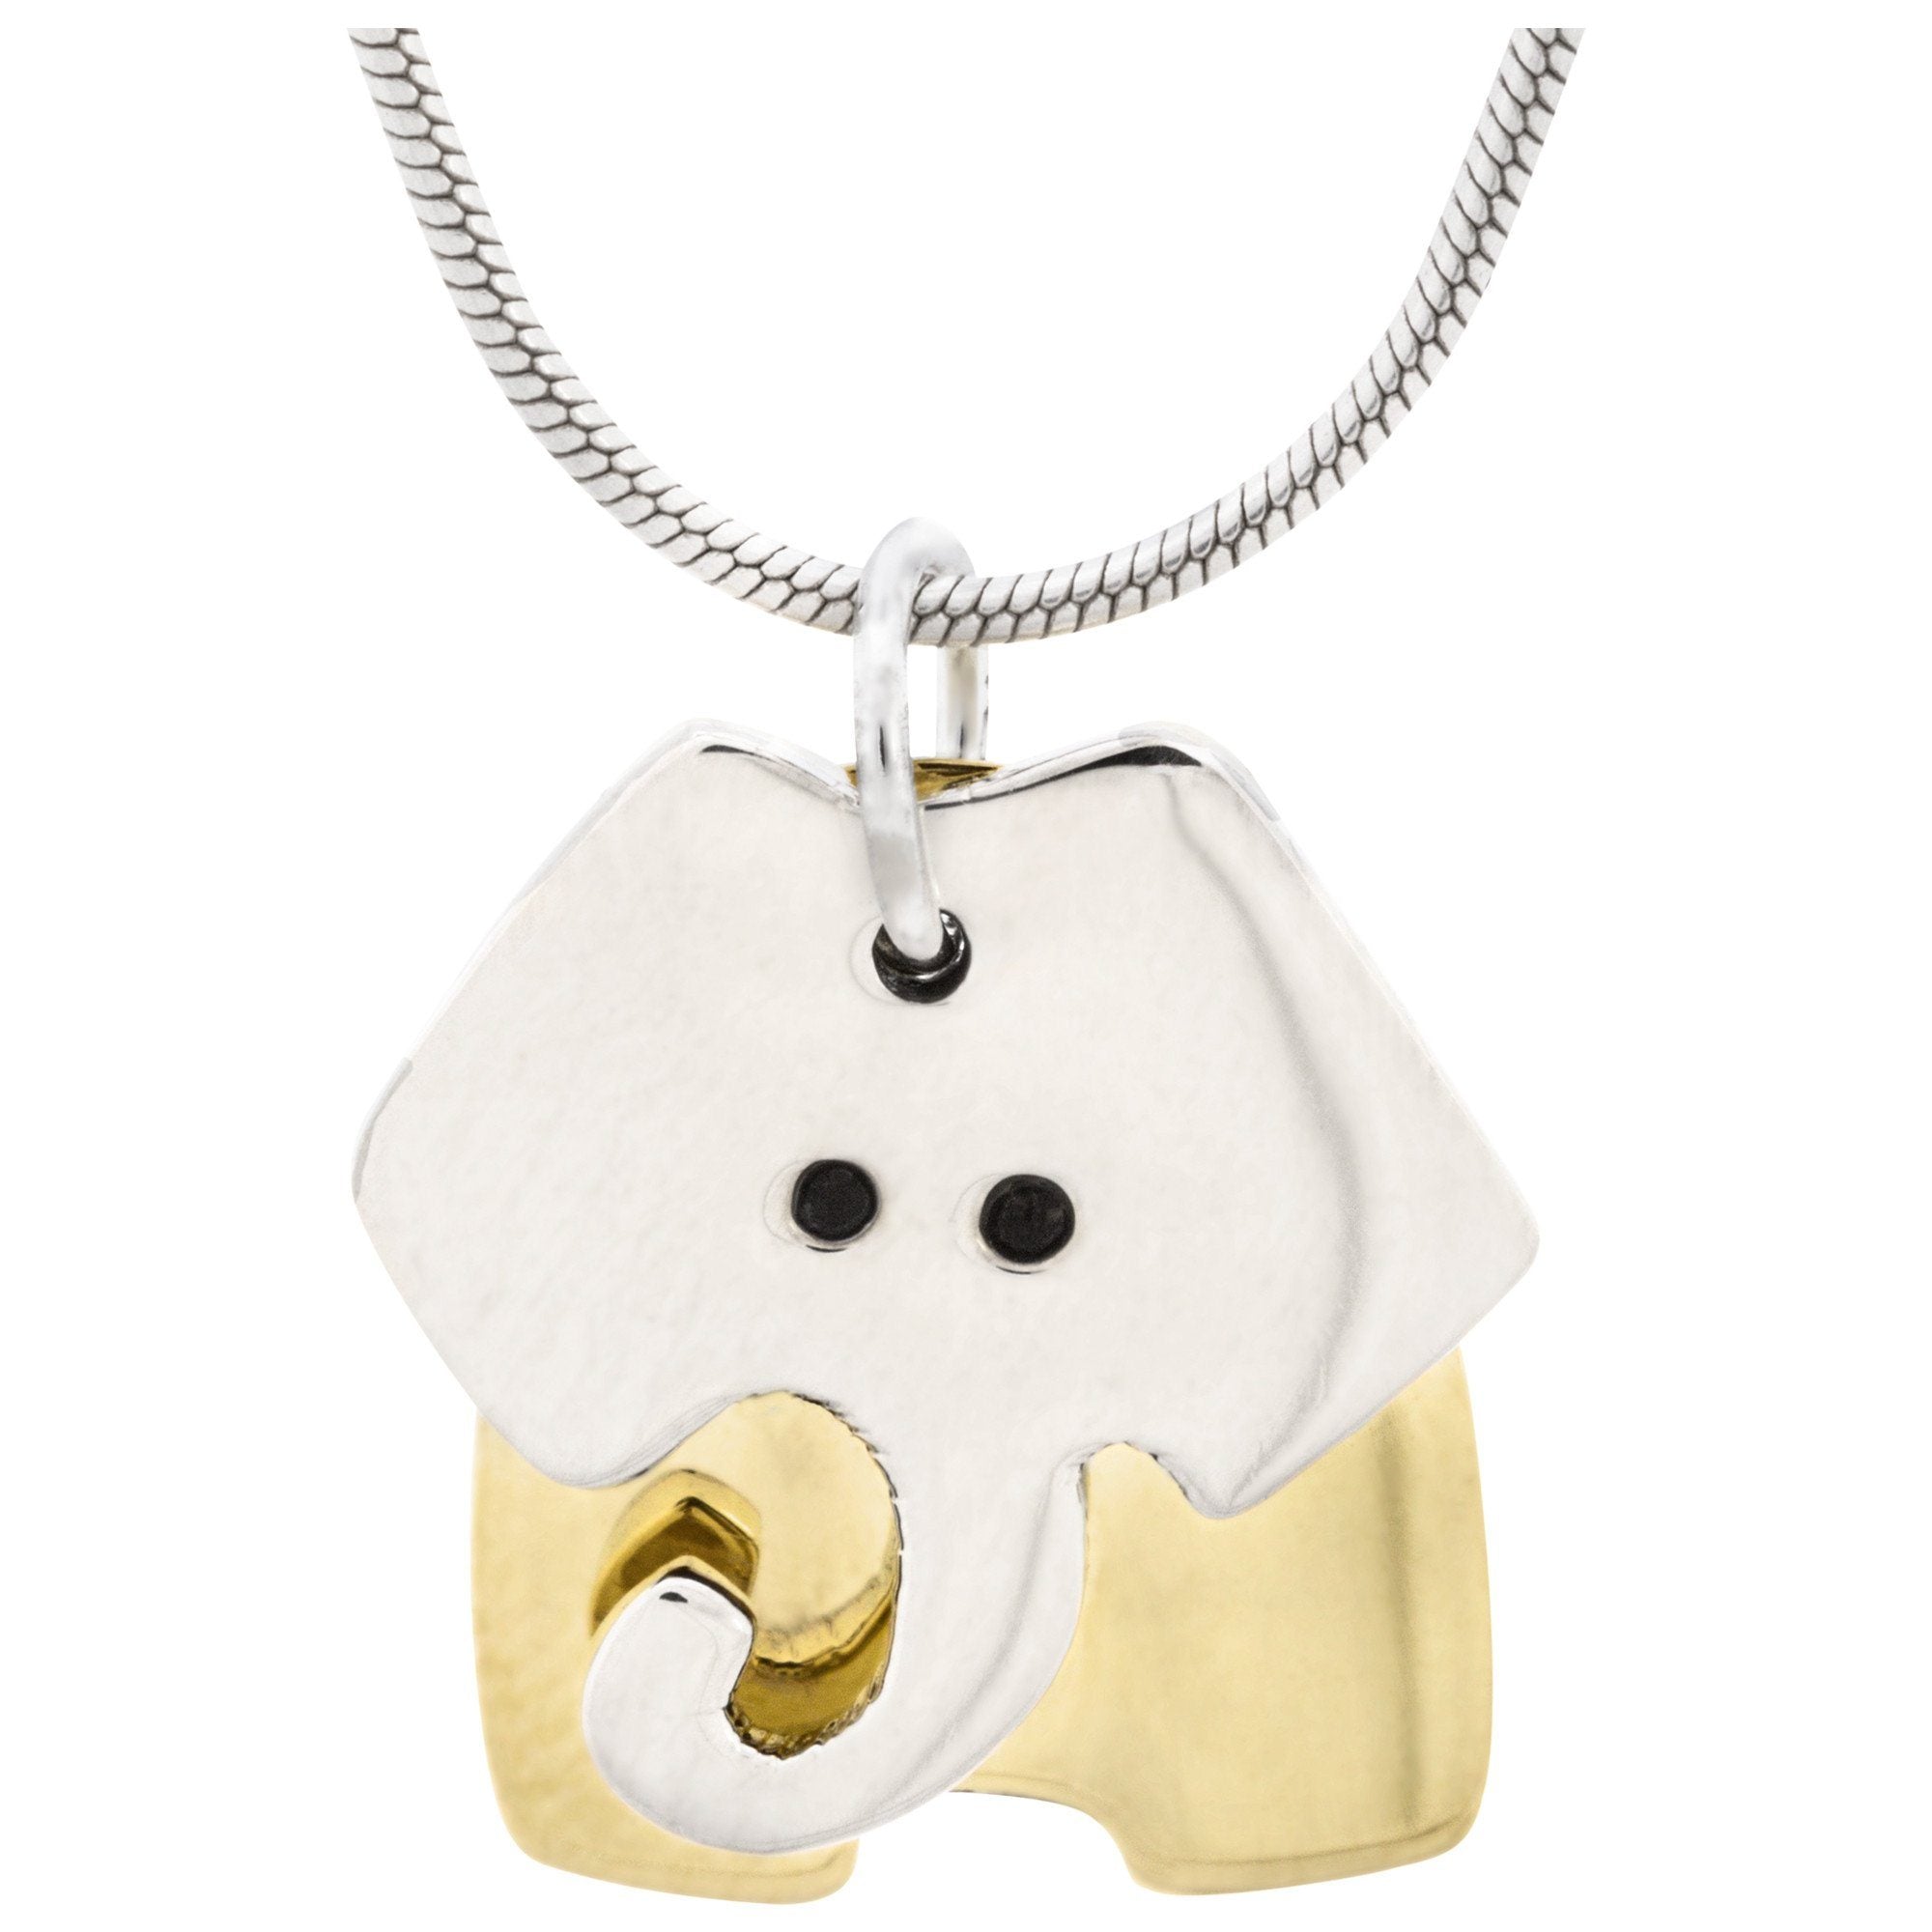 Dancing Elephant Necklace - With Silver Plated Chain